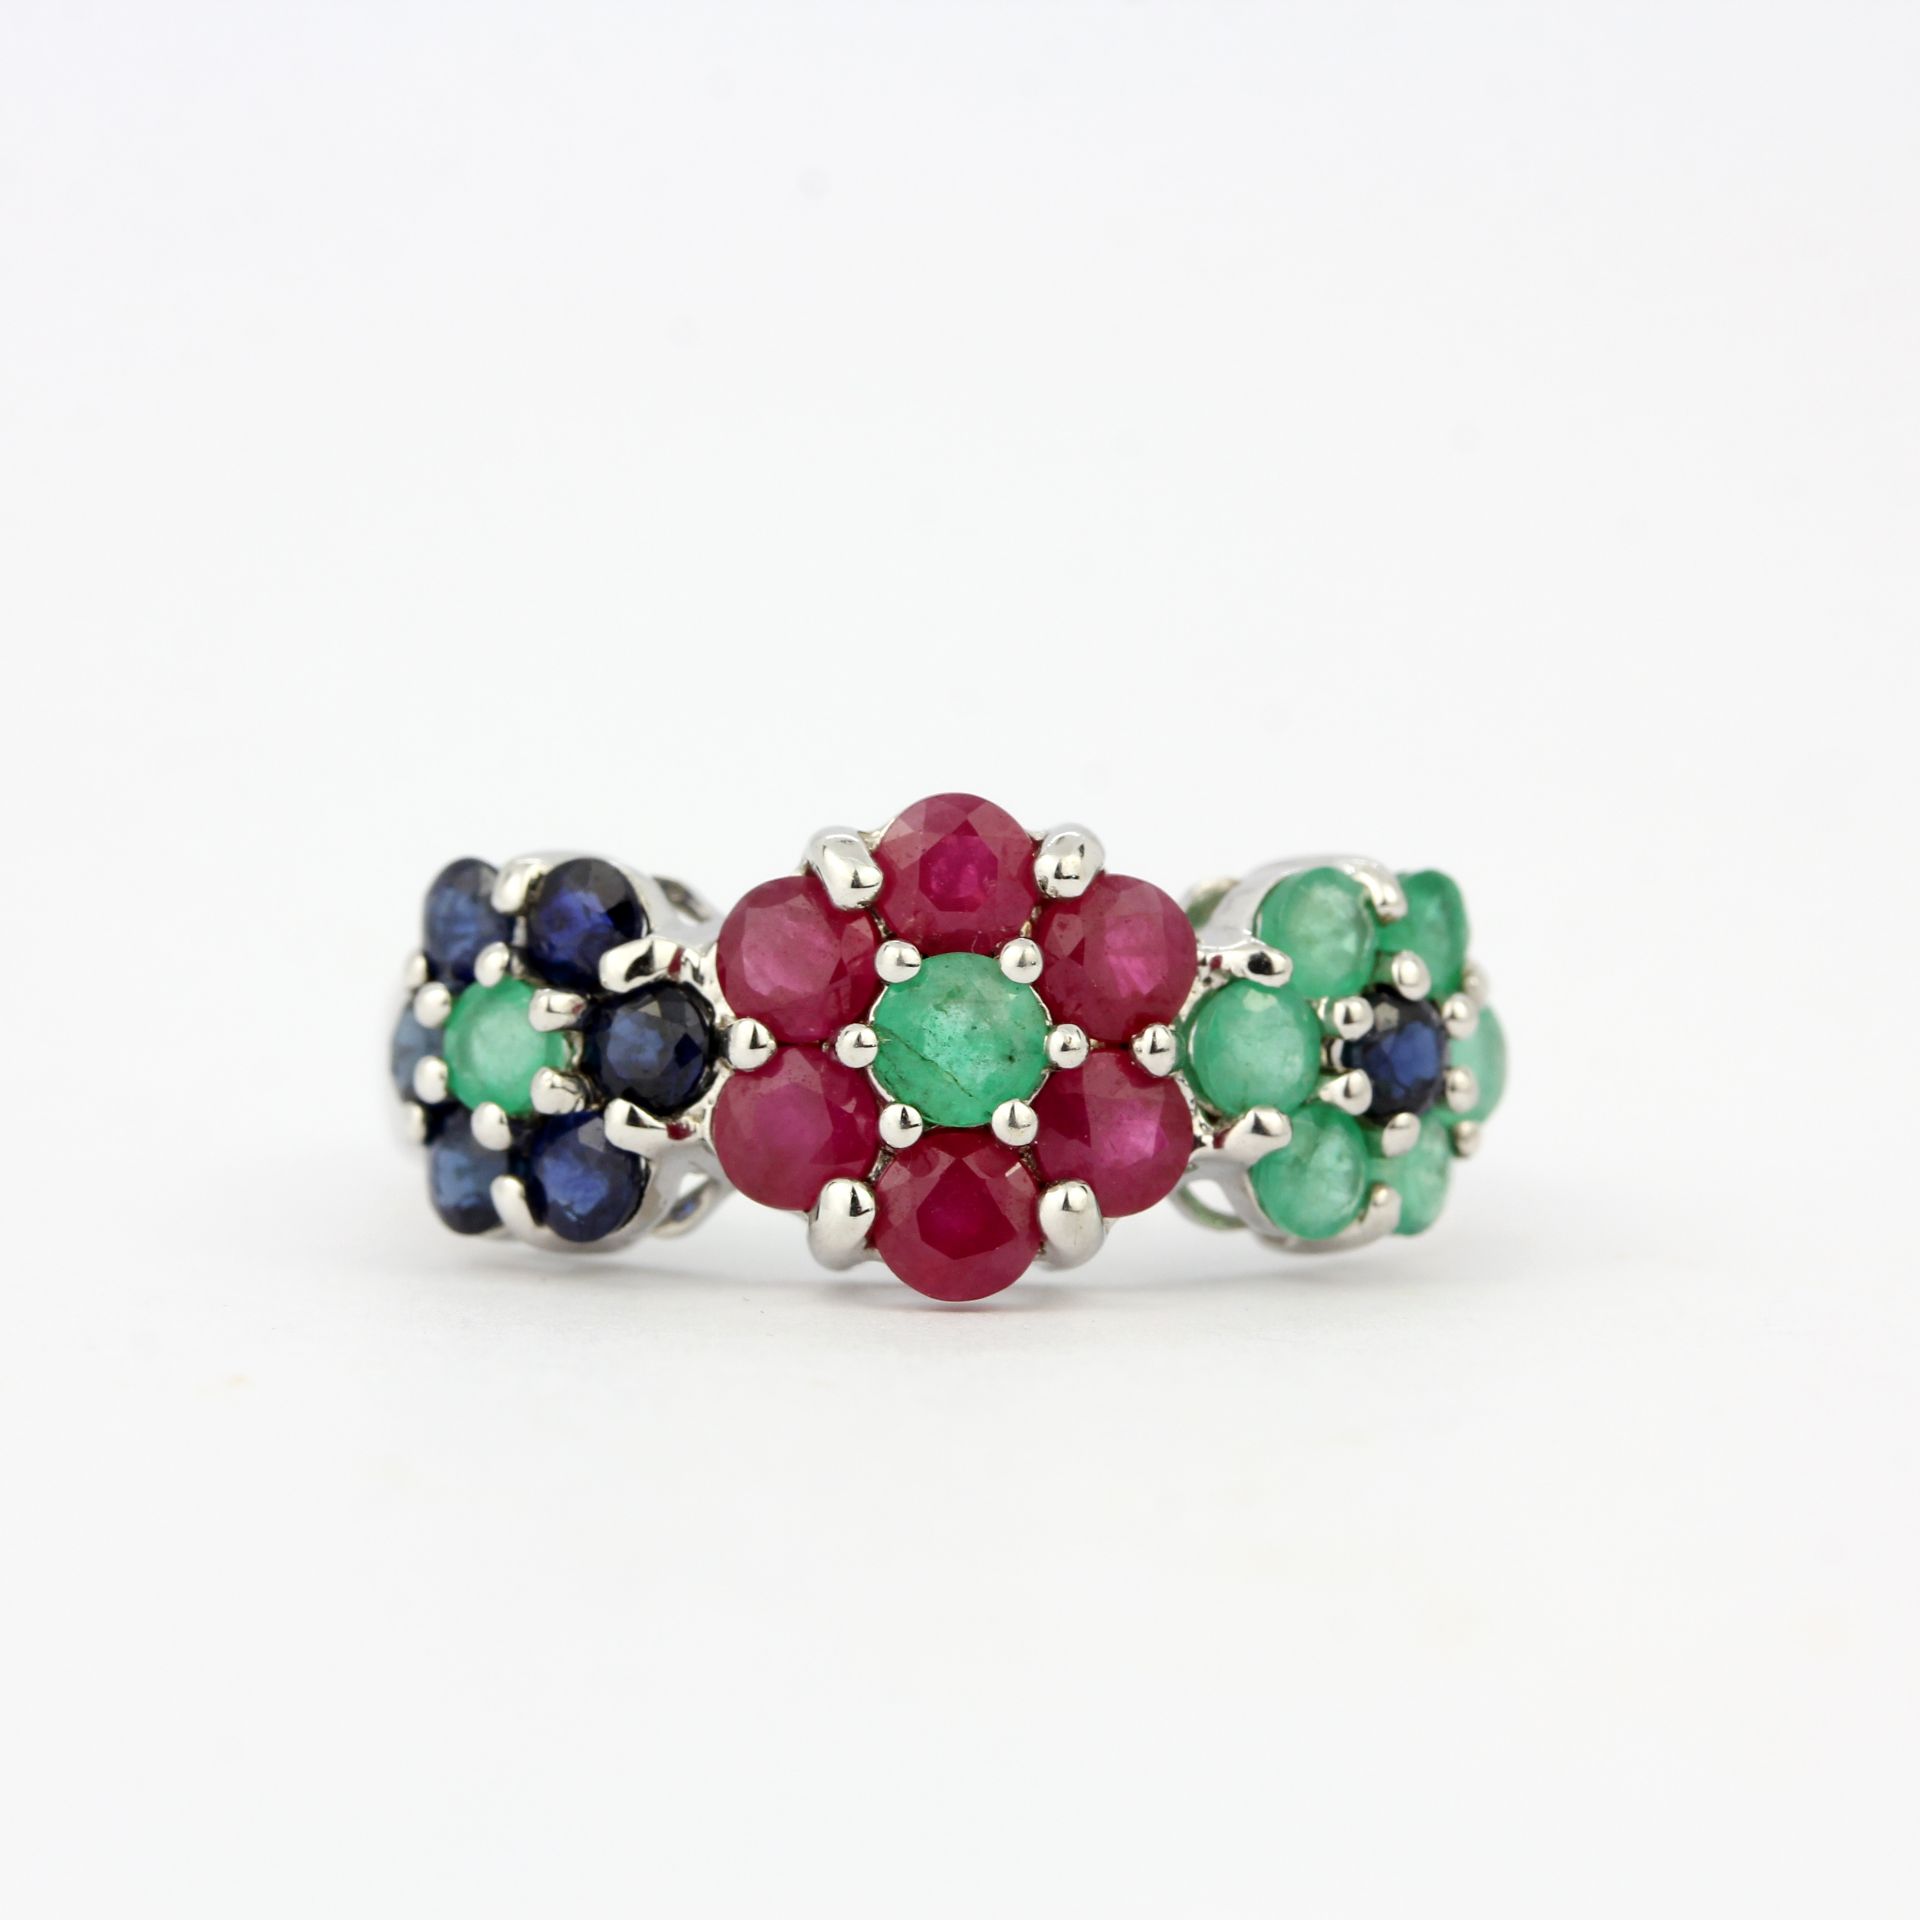 A 9ct white gold flower shaped triple cluster ring set with rubies, emeralds and sapphires, (O).